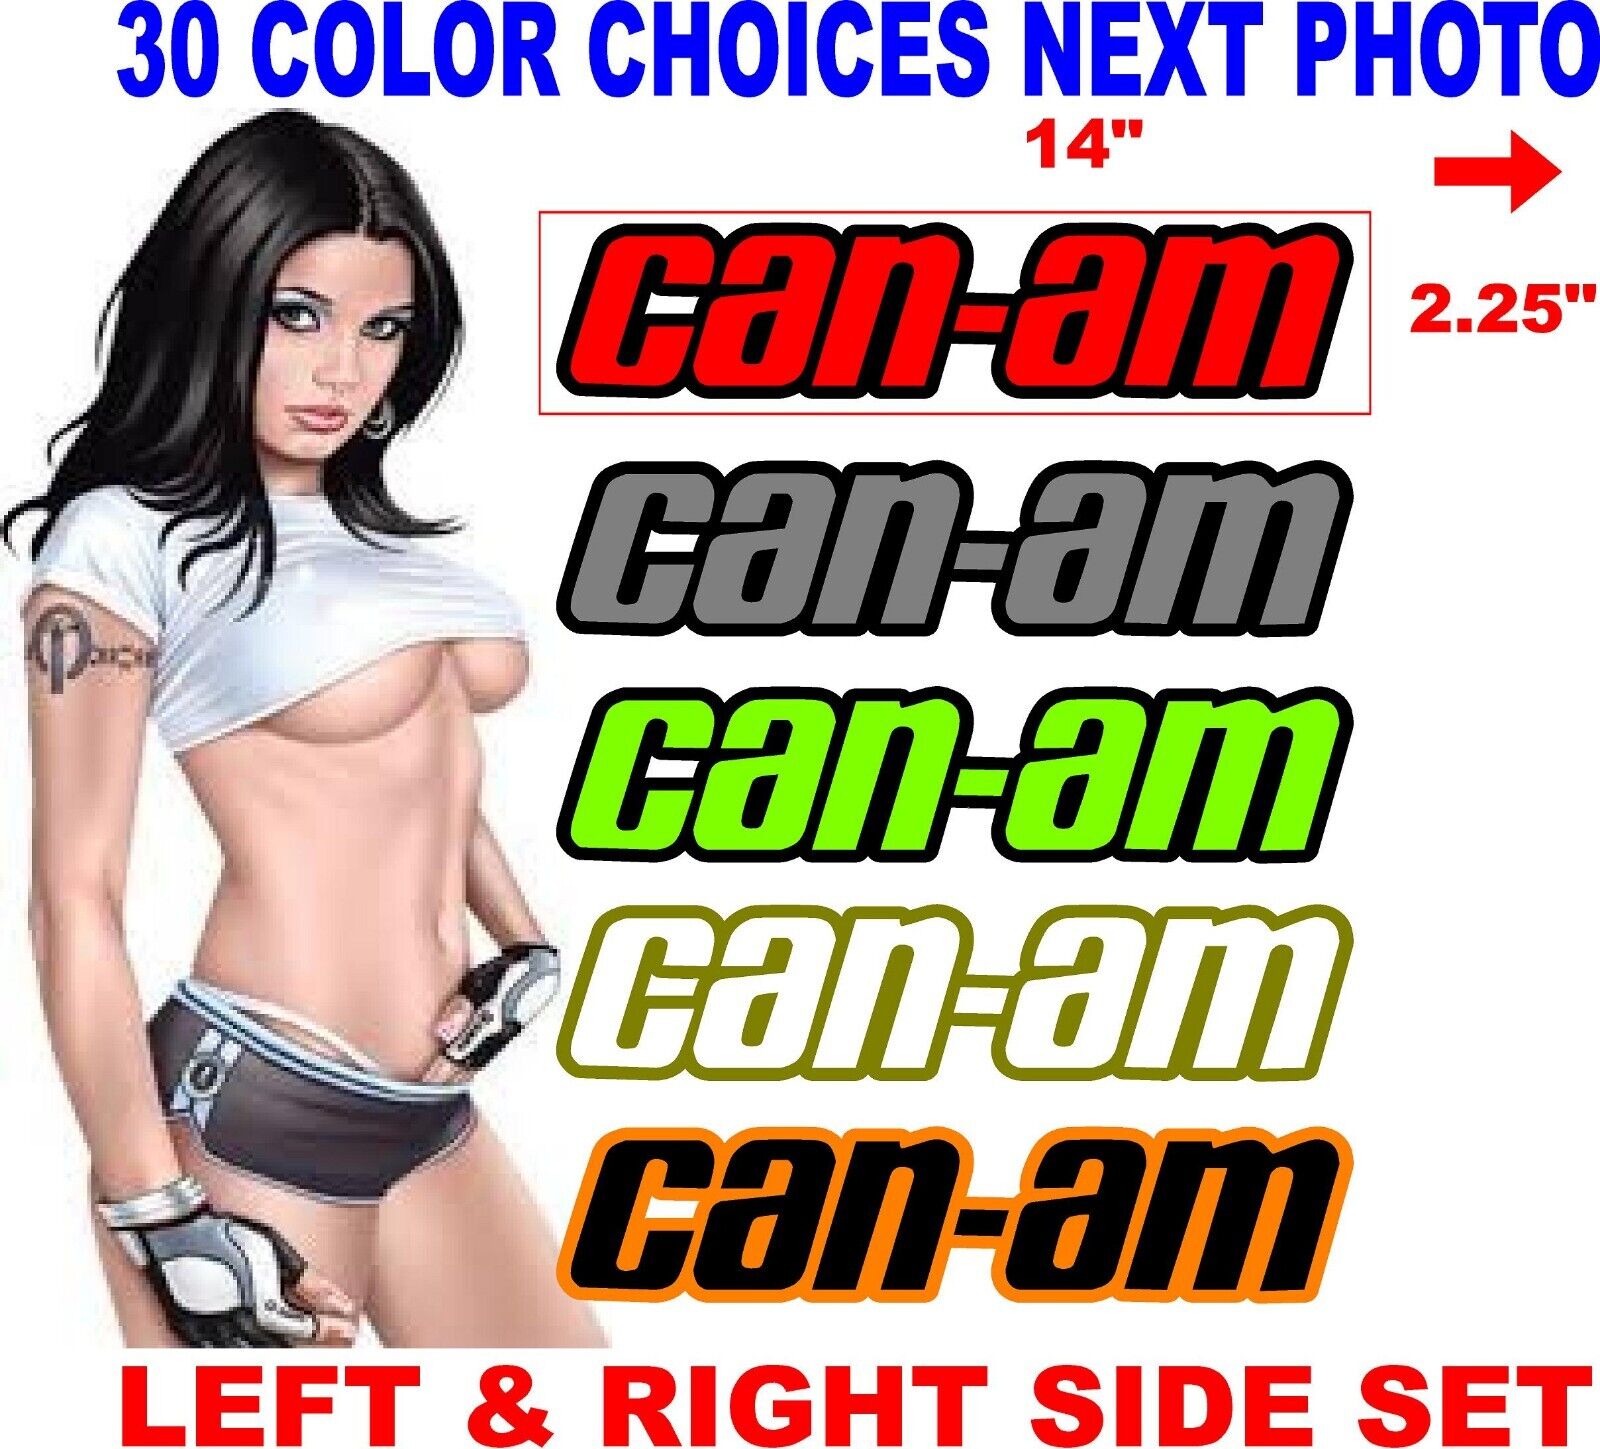 CAN-AM CANAM RYKER SPYDER BPR DECALS DECAL 2 COLOR 30 color choices